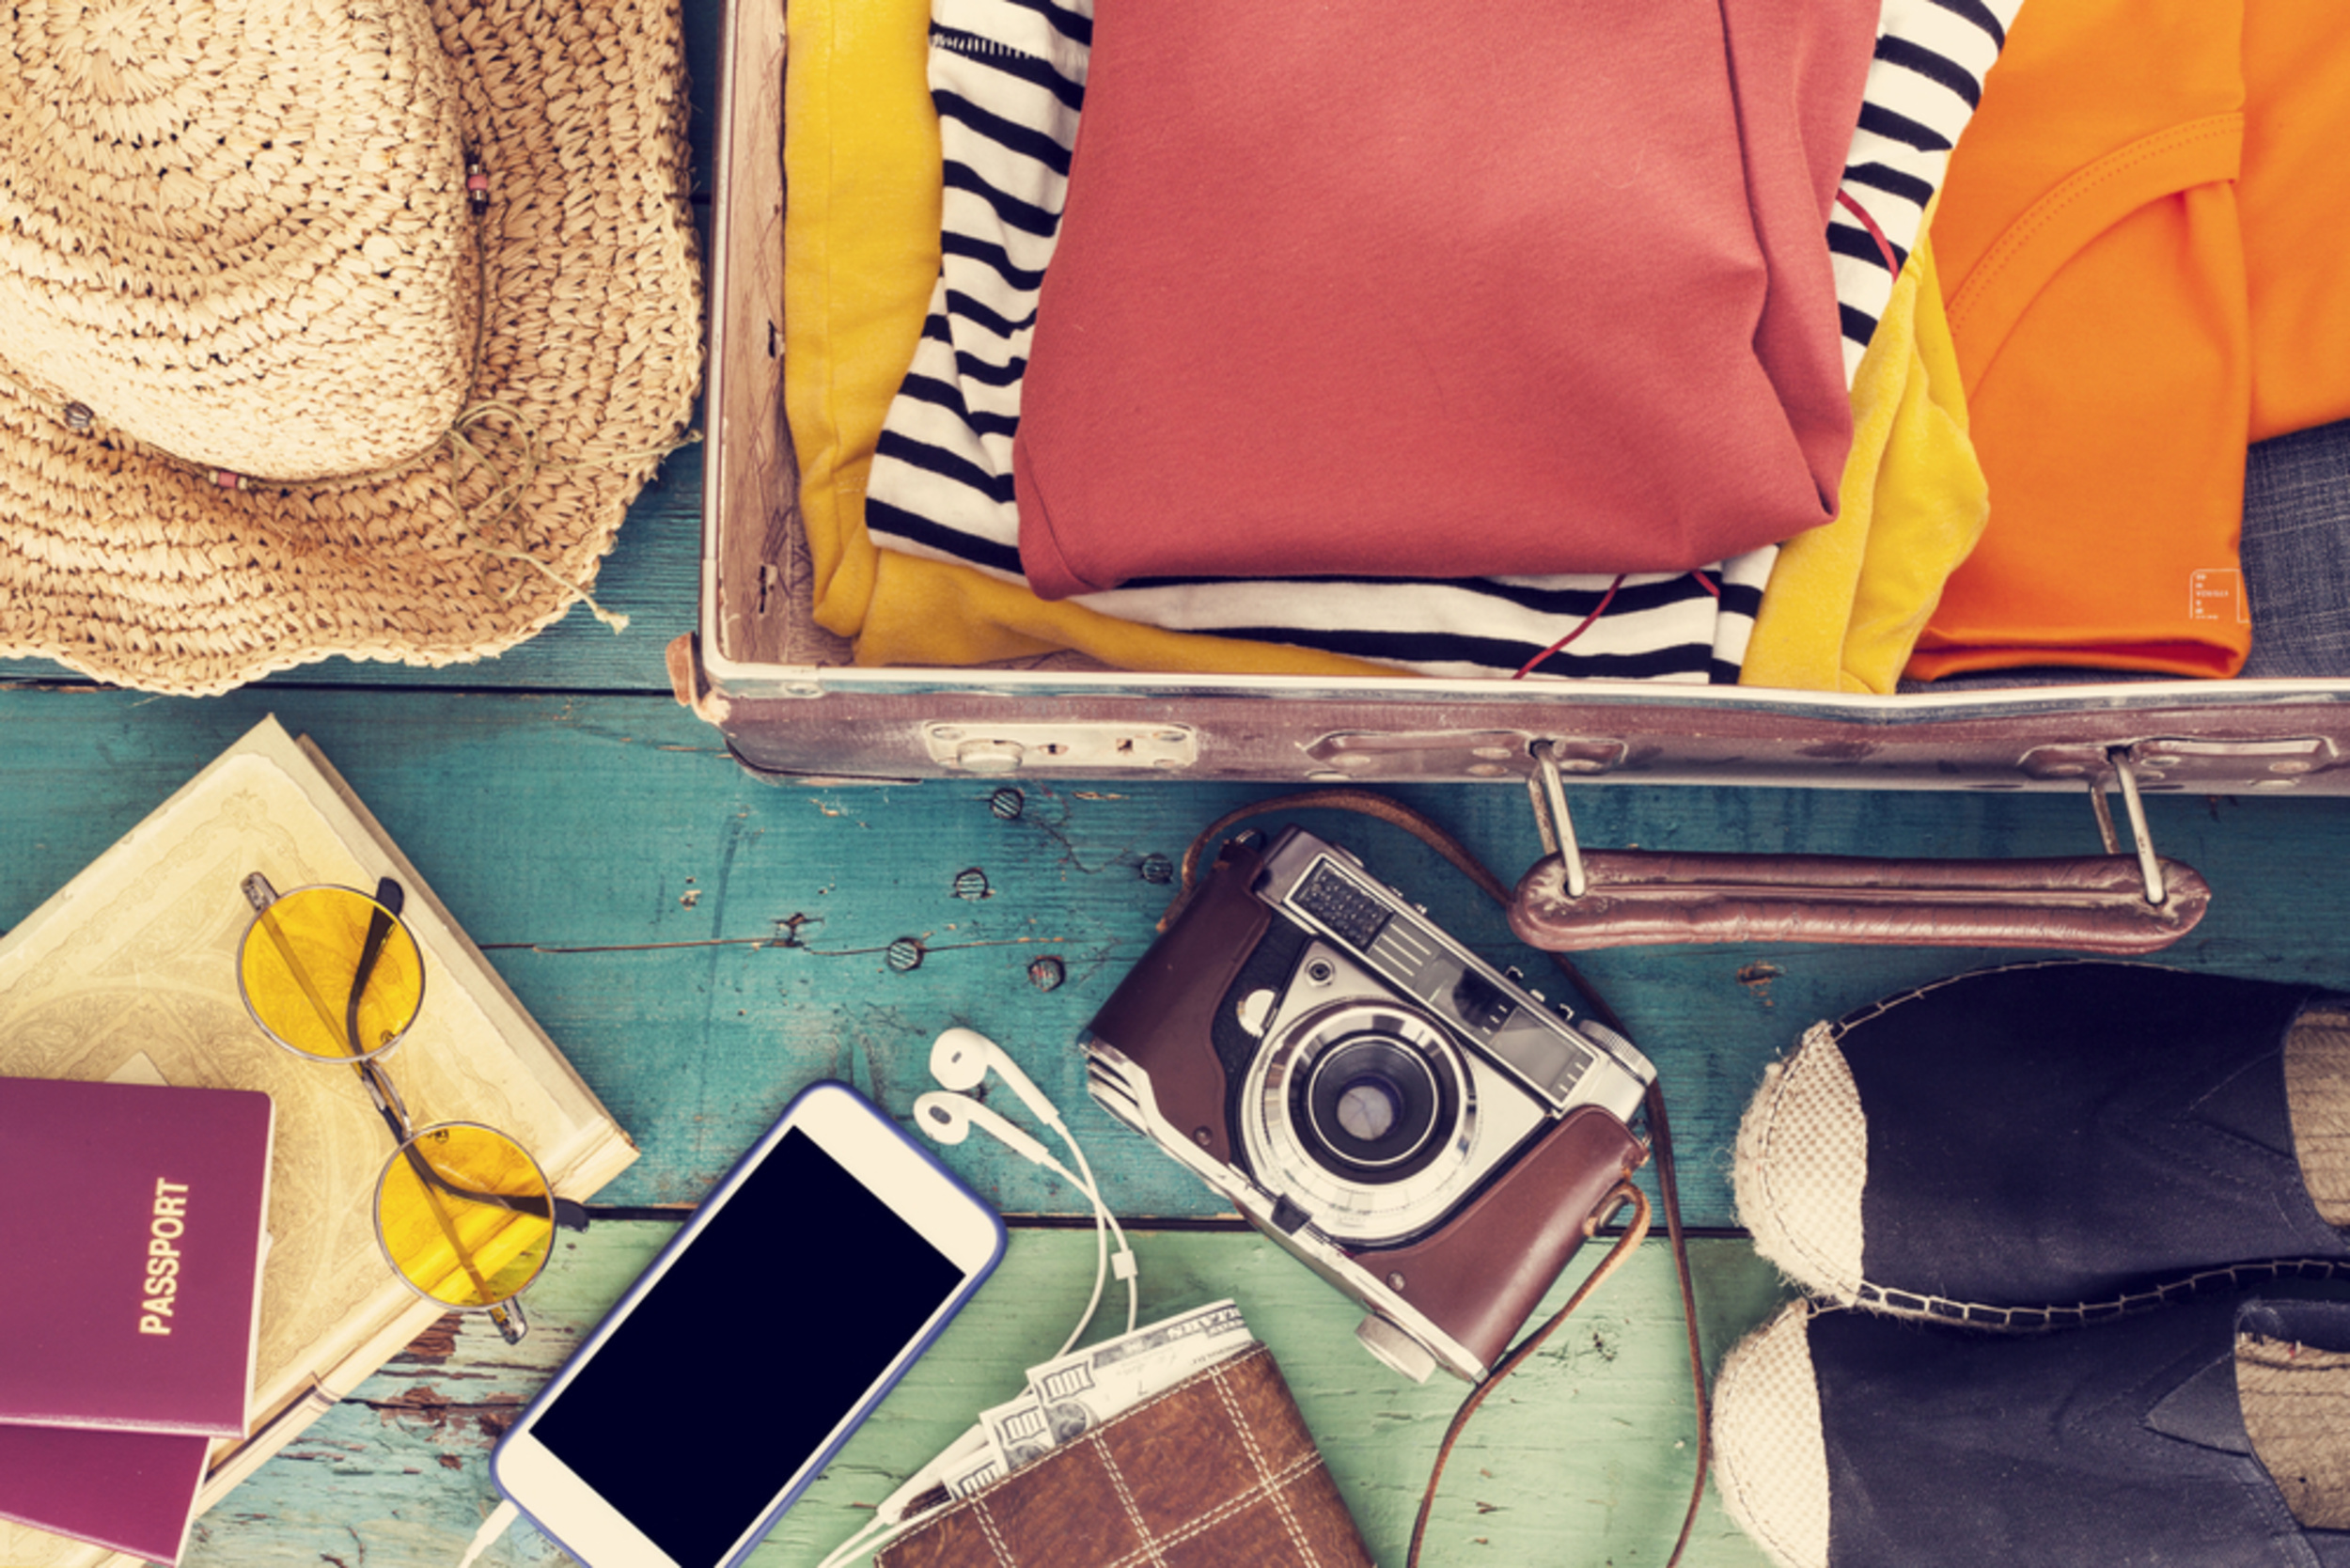 <p>Before you start just throwing stuff into your suitcase, make a list of the things you'll actually need. Be sure to consider special gear (like swimsuits for the beach or hiking boots for muddy trails) and don't forget to include all the chargers for your gadgets. </p><p>You may also like: <a href='https://www.yardbarker.com/lifestyle/articles/celebrate_st_patricks_day_with_these_20_irish_themed_recipes_031524/s1__37281975'>Celebrate St. Patrick’s Day with these 20 Irish-themed recipes</a></p>